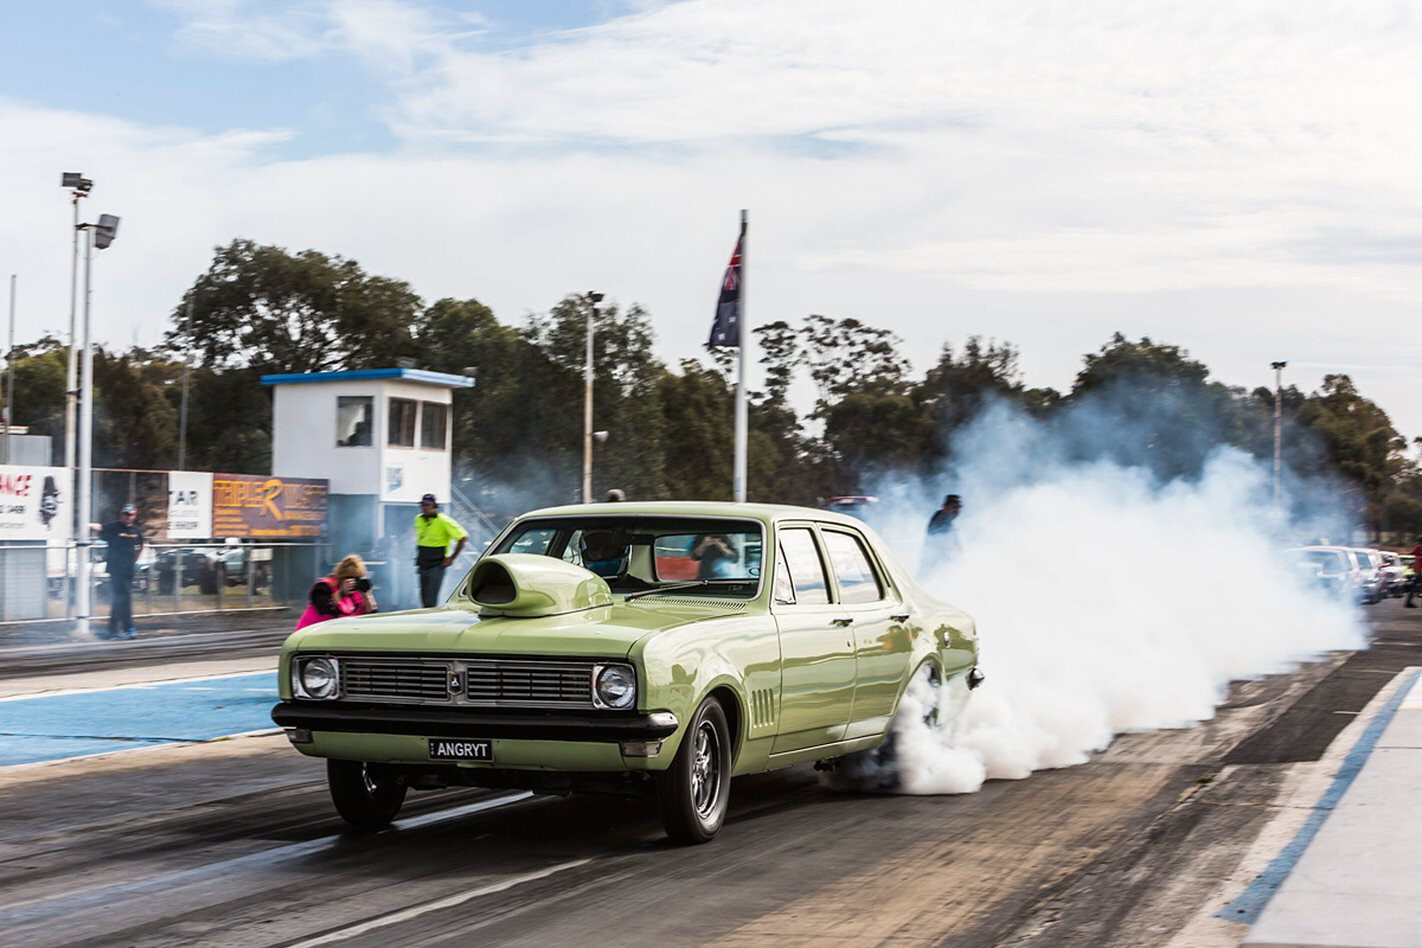 VIDEO: LS-POWERED HT HOLDEN – ANGRYT